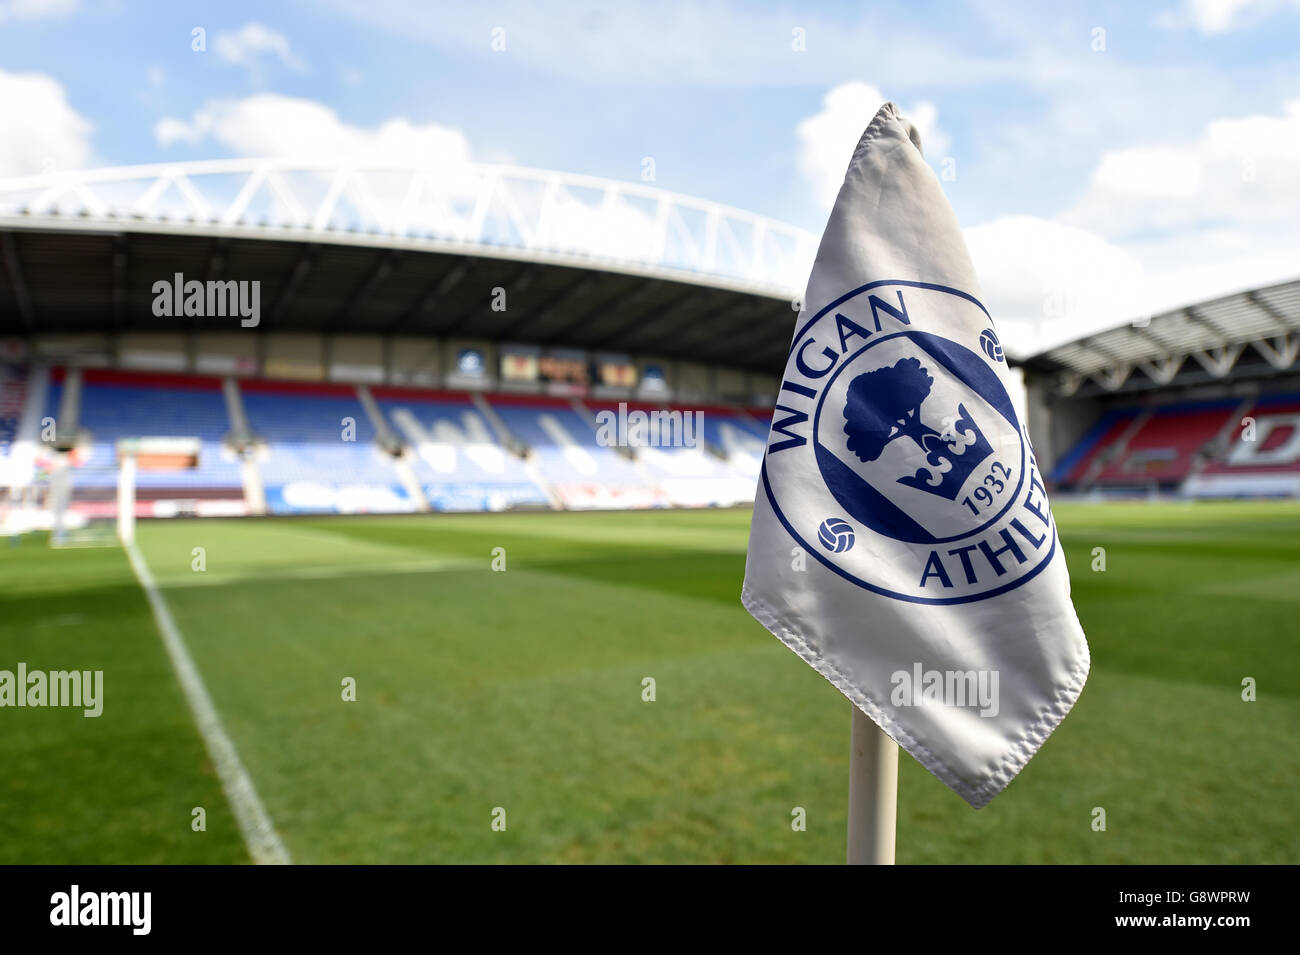 Wigan Athletic v Coventry City - Sky Bet League One - DW Stadium Stock Photo